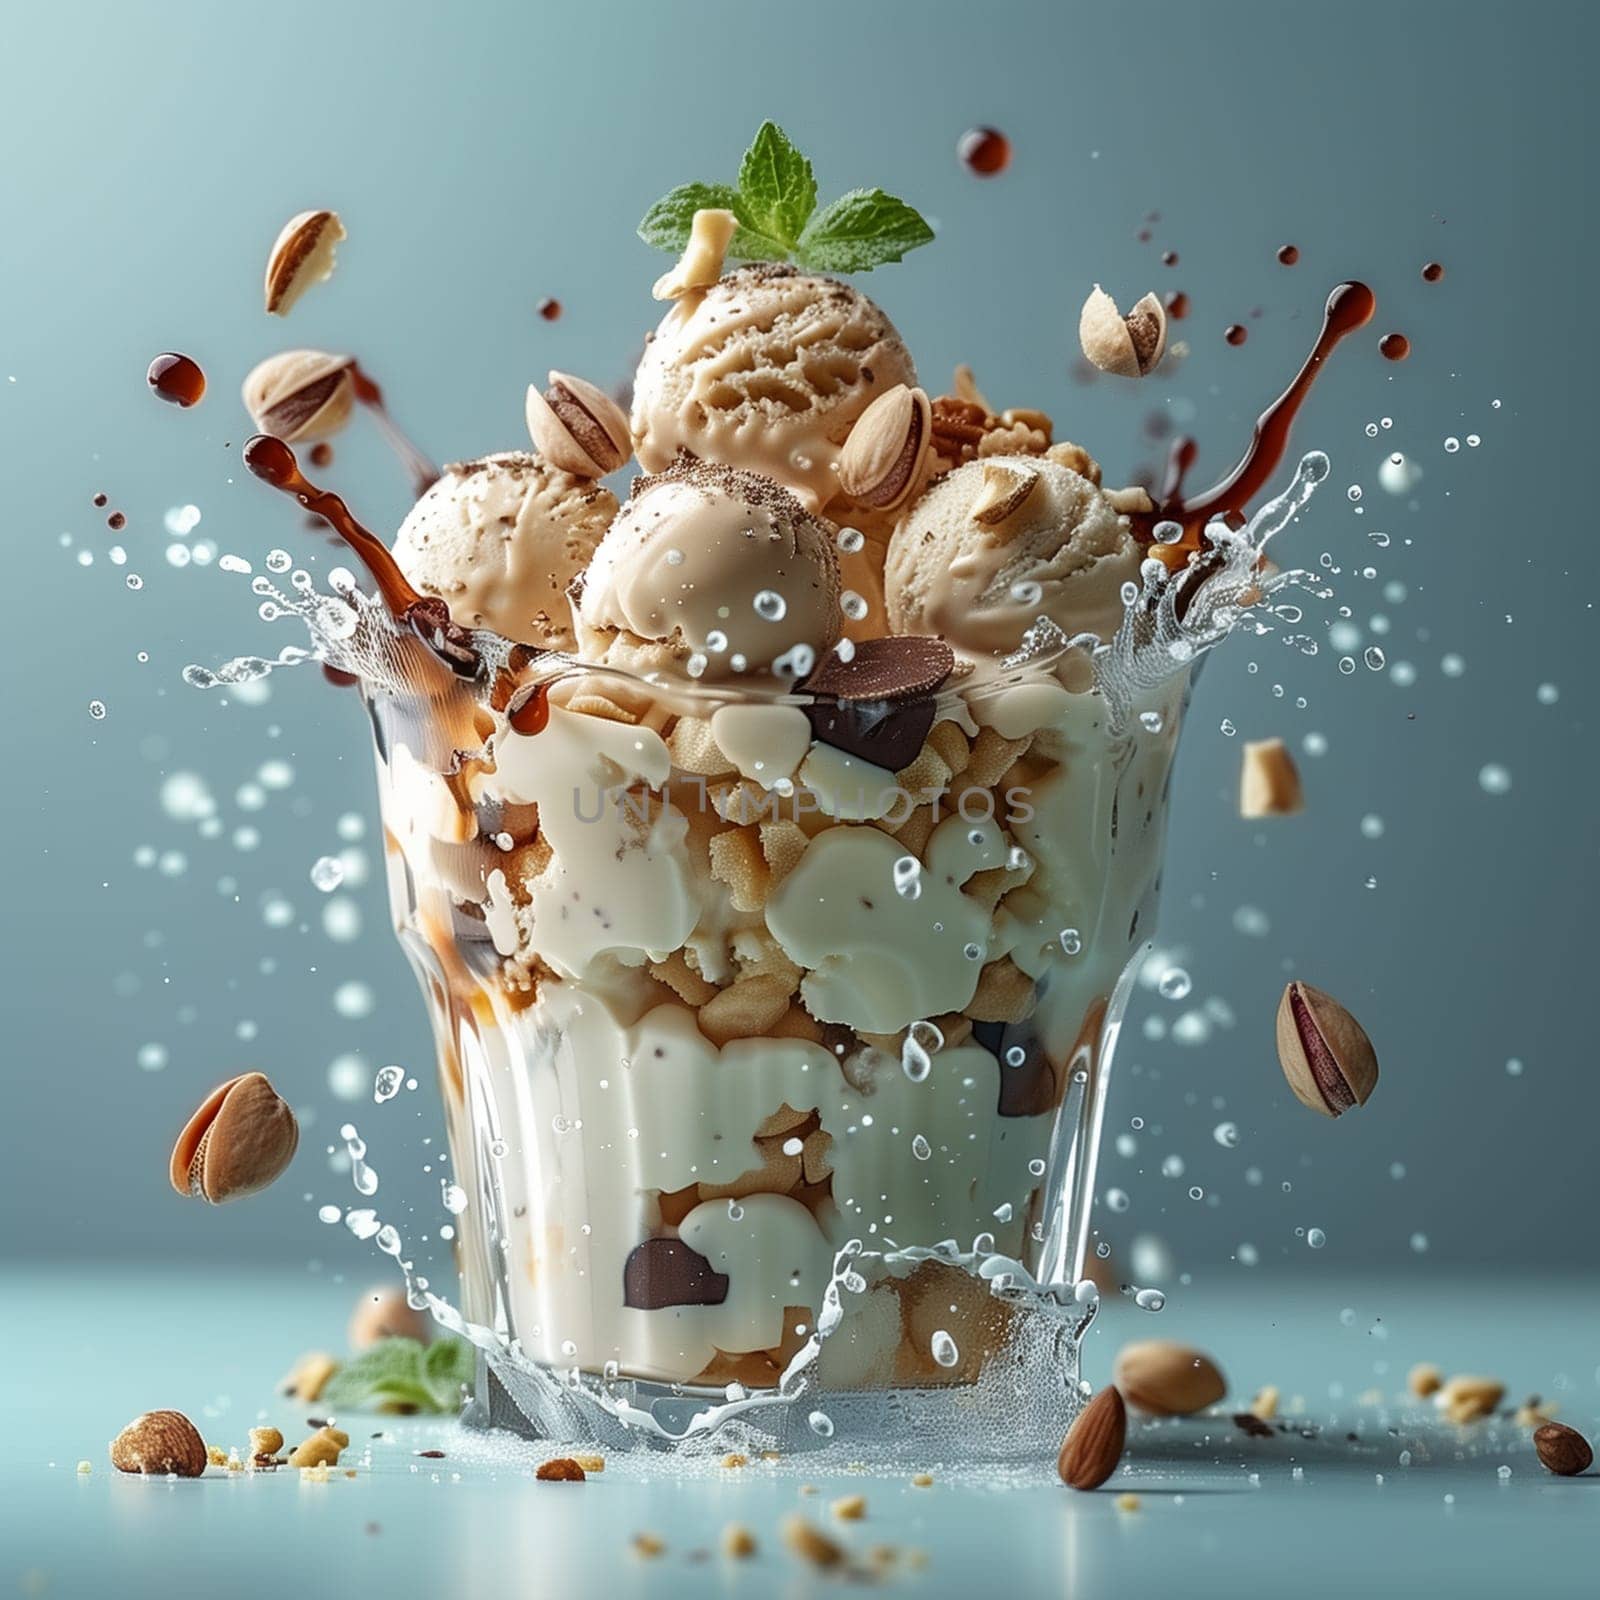 A cup filled with creamy ice cream topped with crunchy nuts, ready to be enjoyed as a sweet treat.